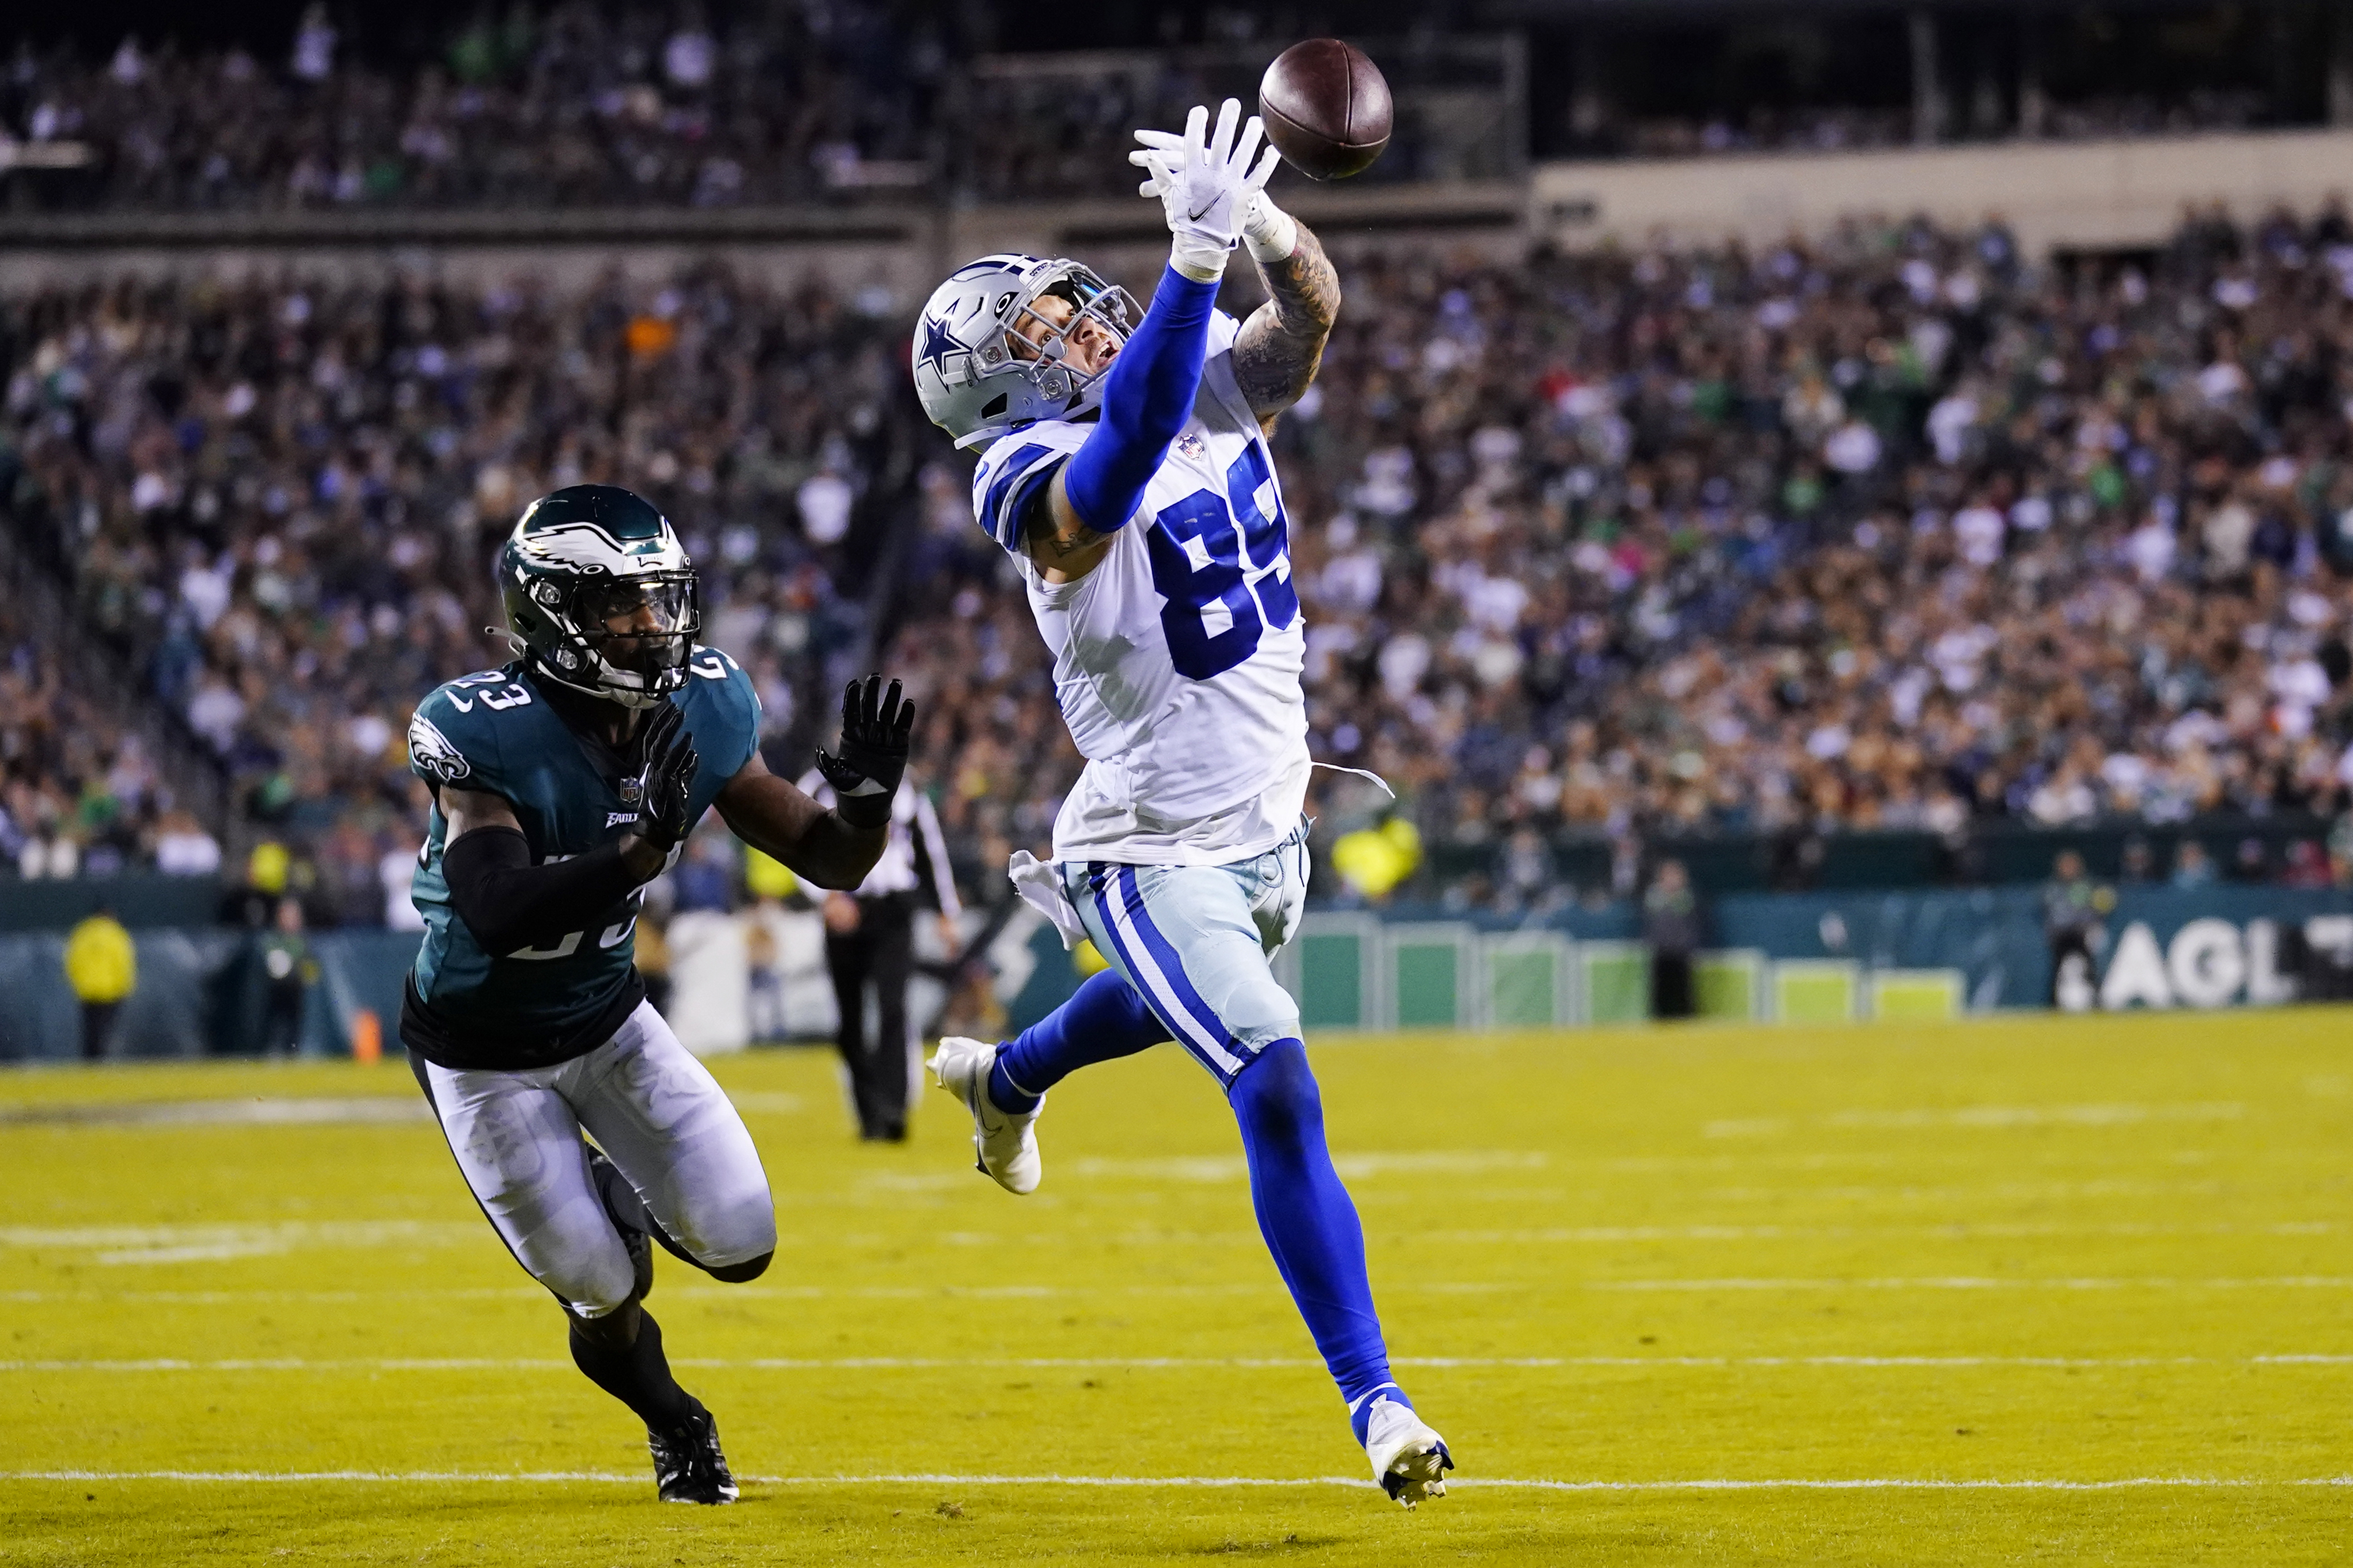 MONDAY HUDDLE: Cowboys loss in Philly likely ends any QB debate